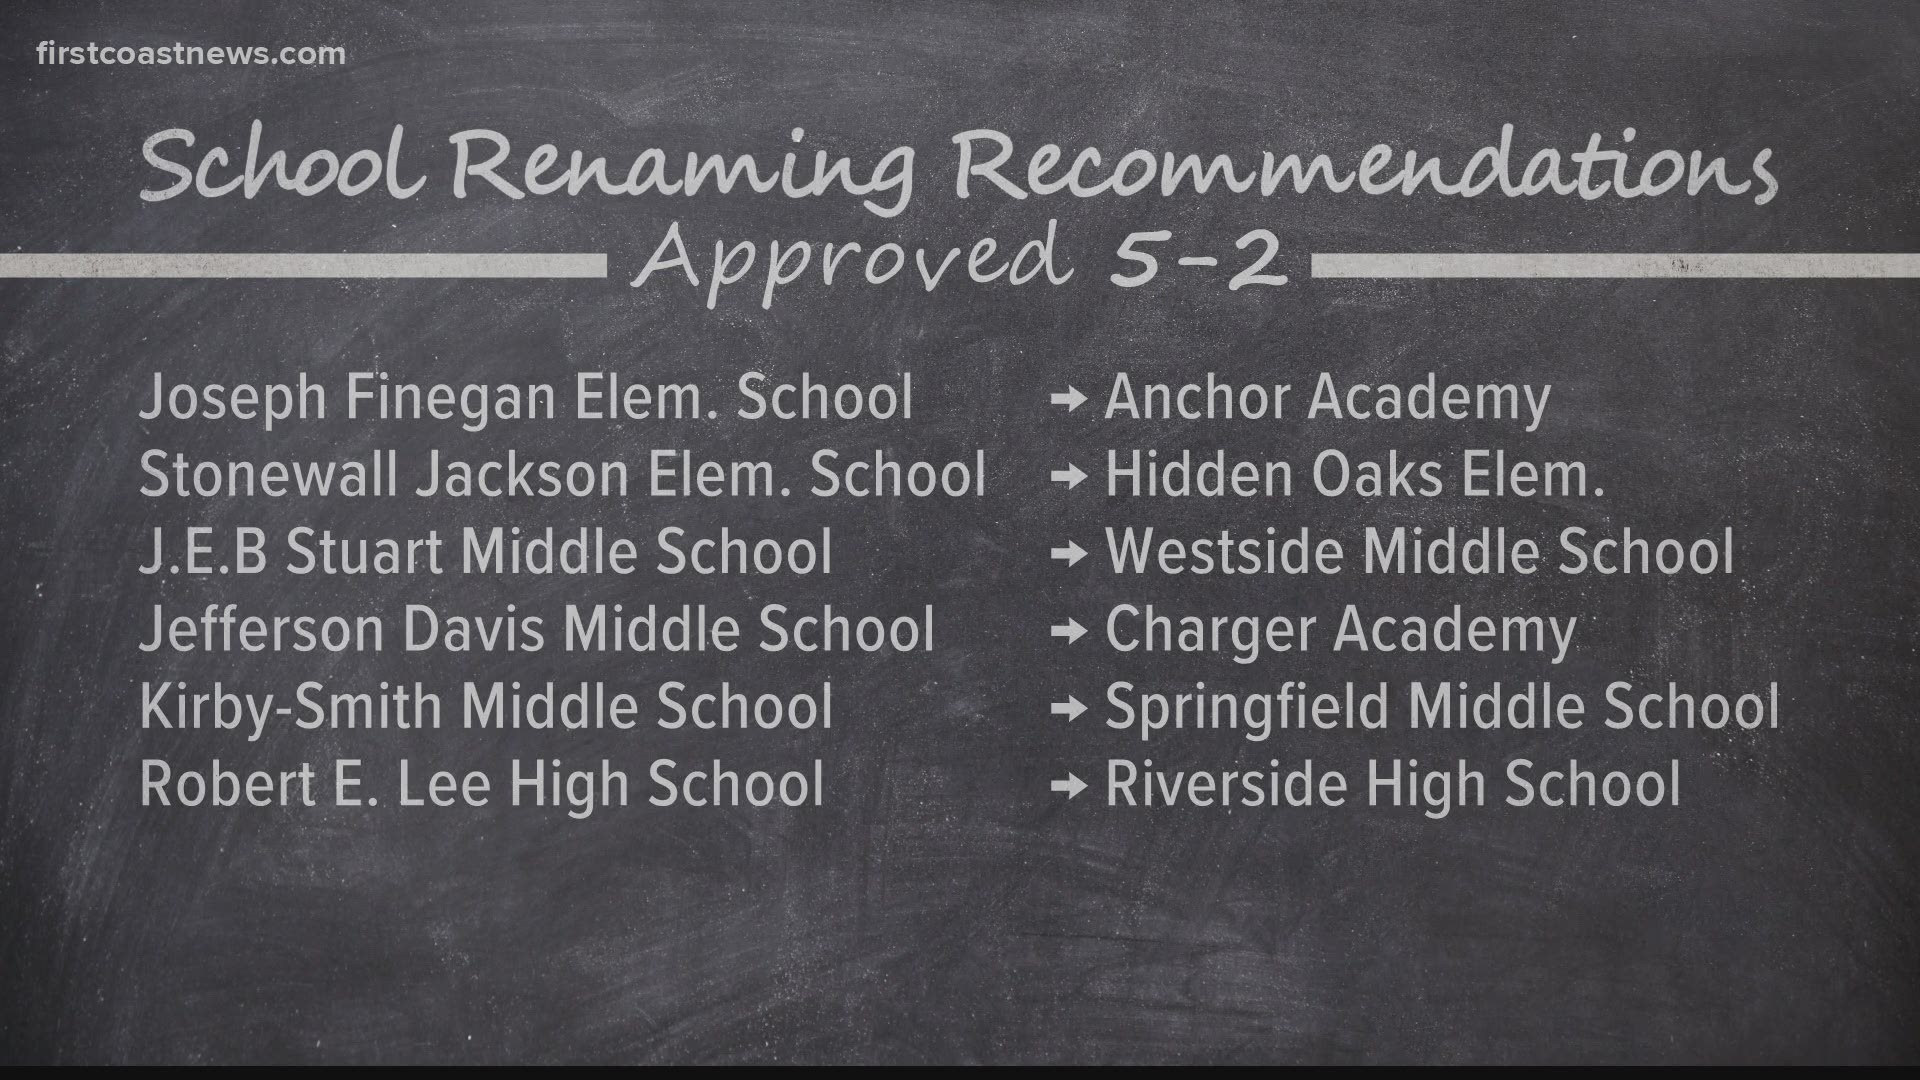 The superintendent recommended six schools to be renamed, all named for Confederate figures.